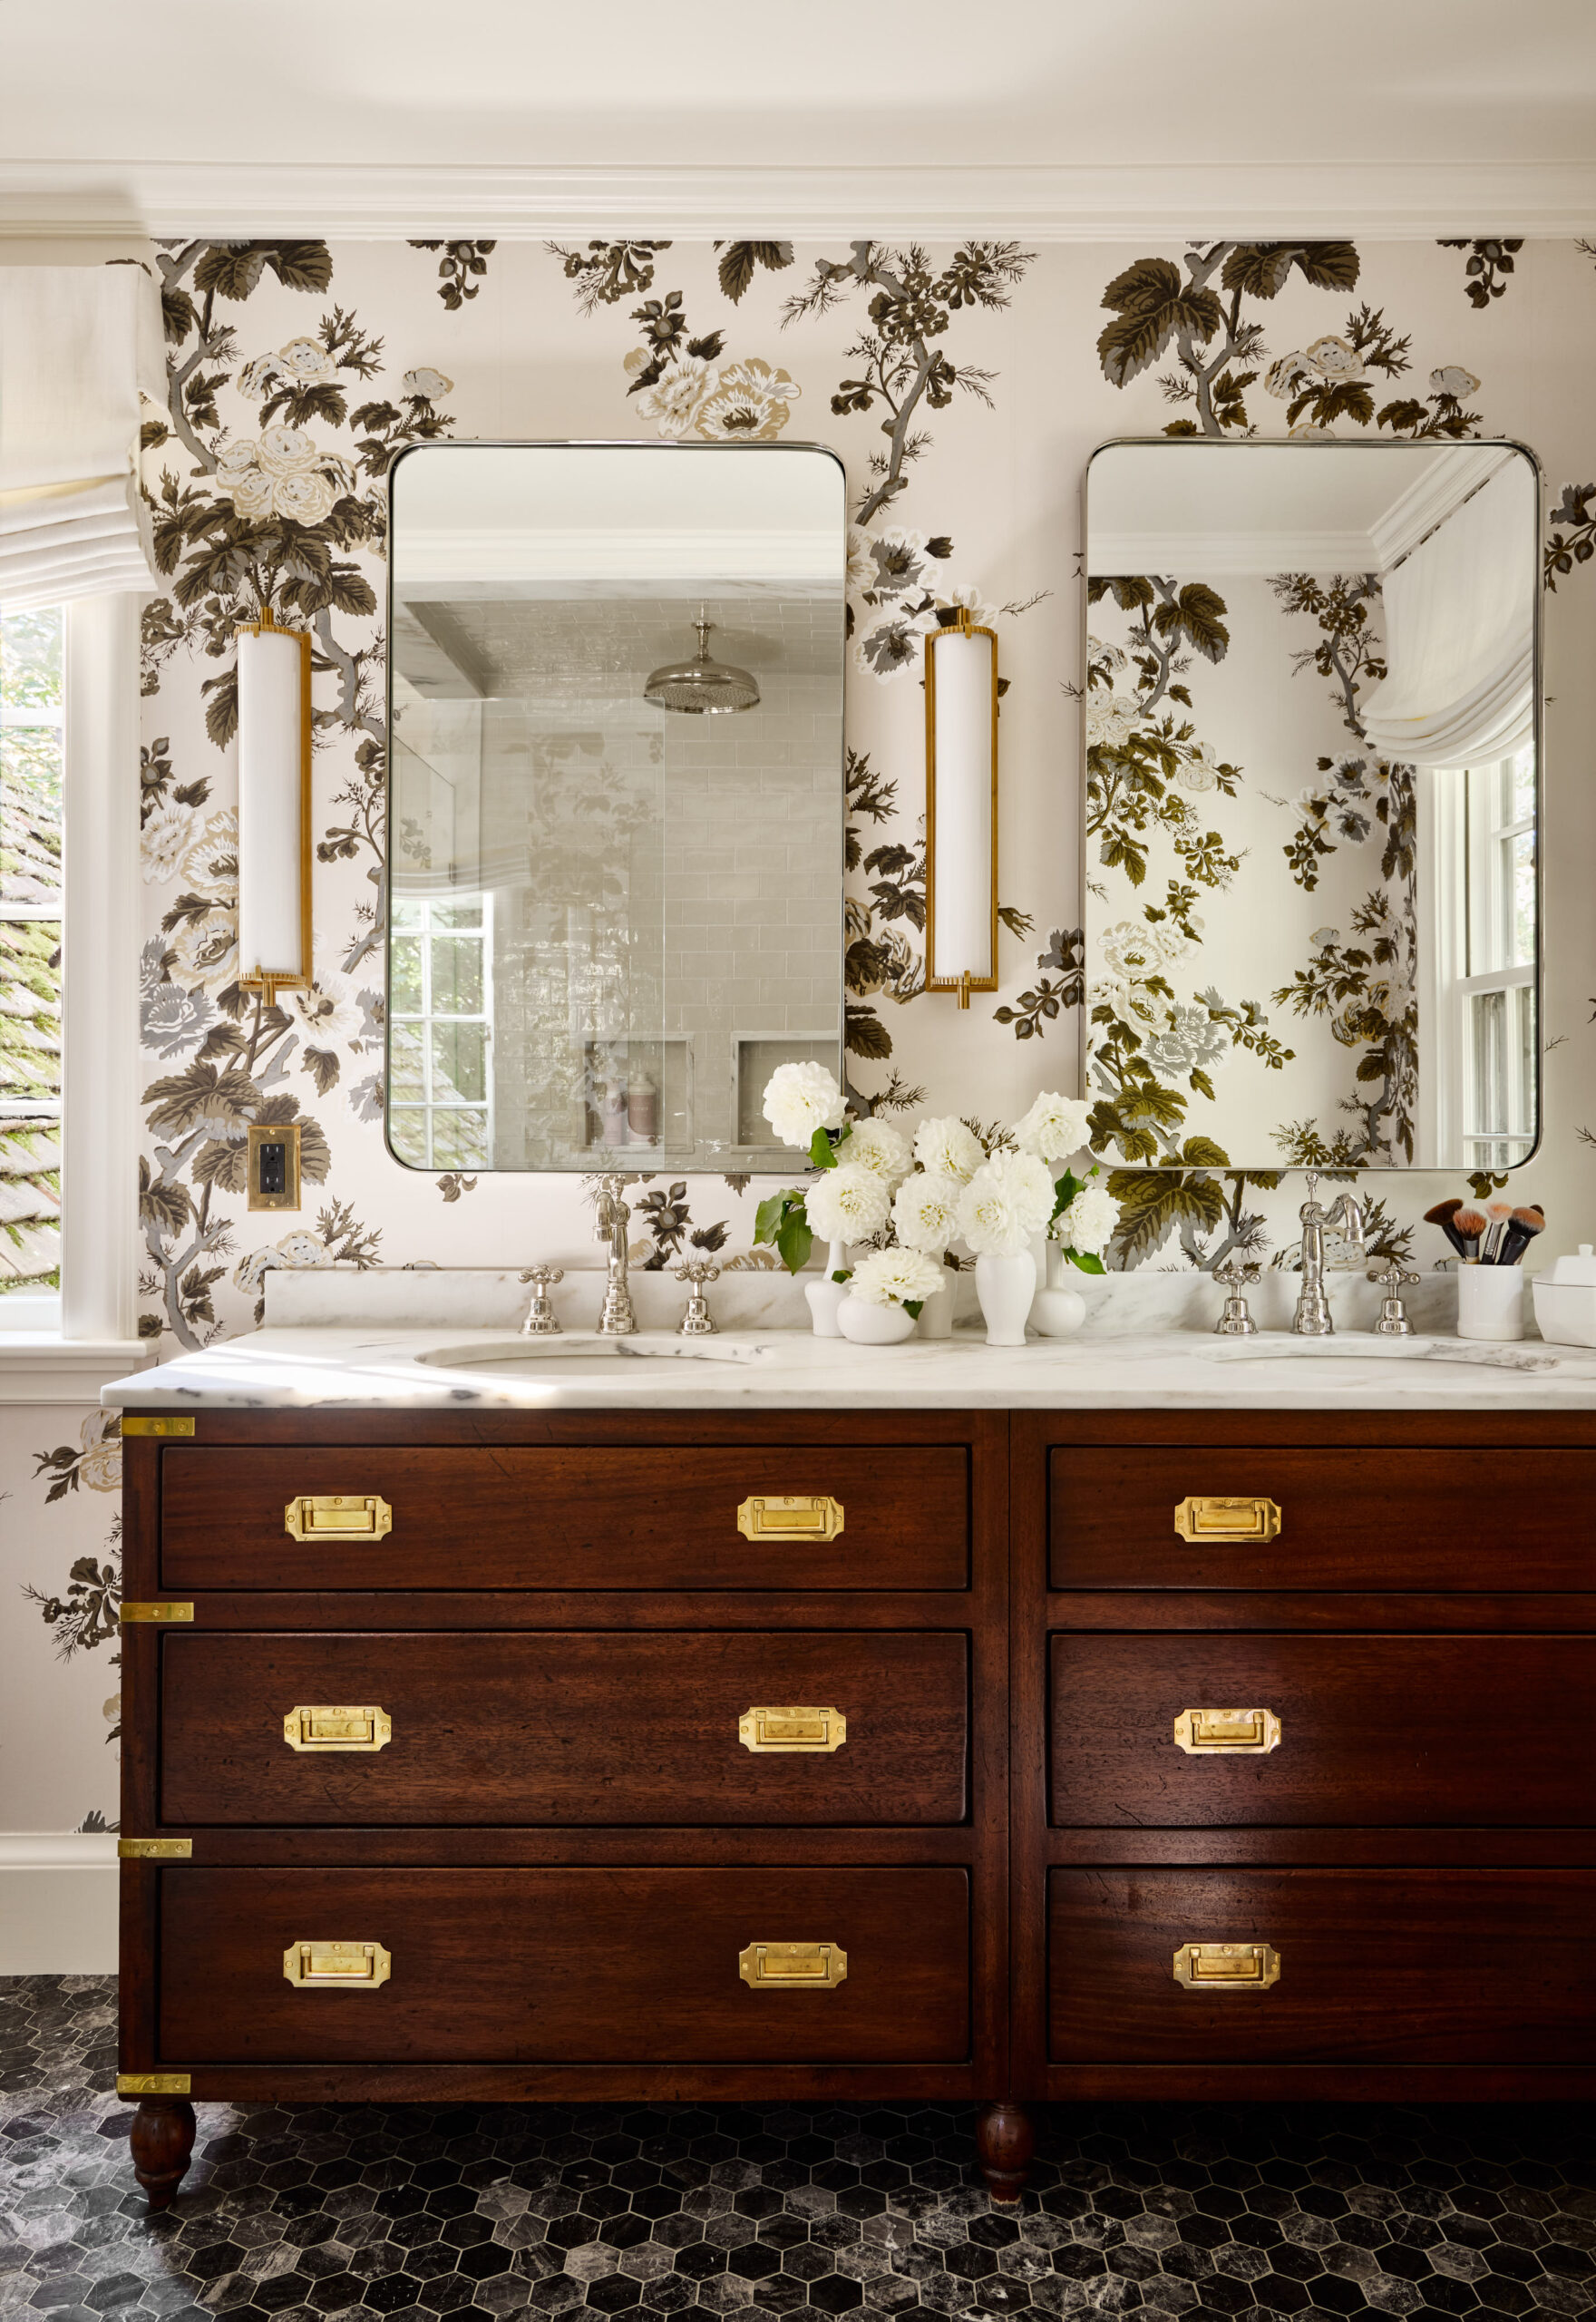 Design by Katie Rosenfeld featuring Schumacher Pyne Hollyhock wallpaper. Photo by Read McKendree. Vanity by Vanity & Co.